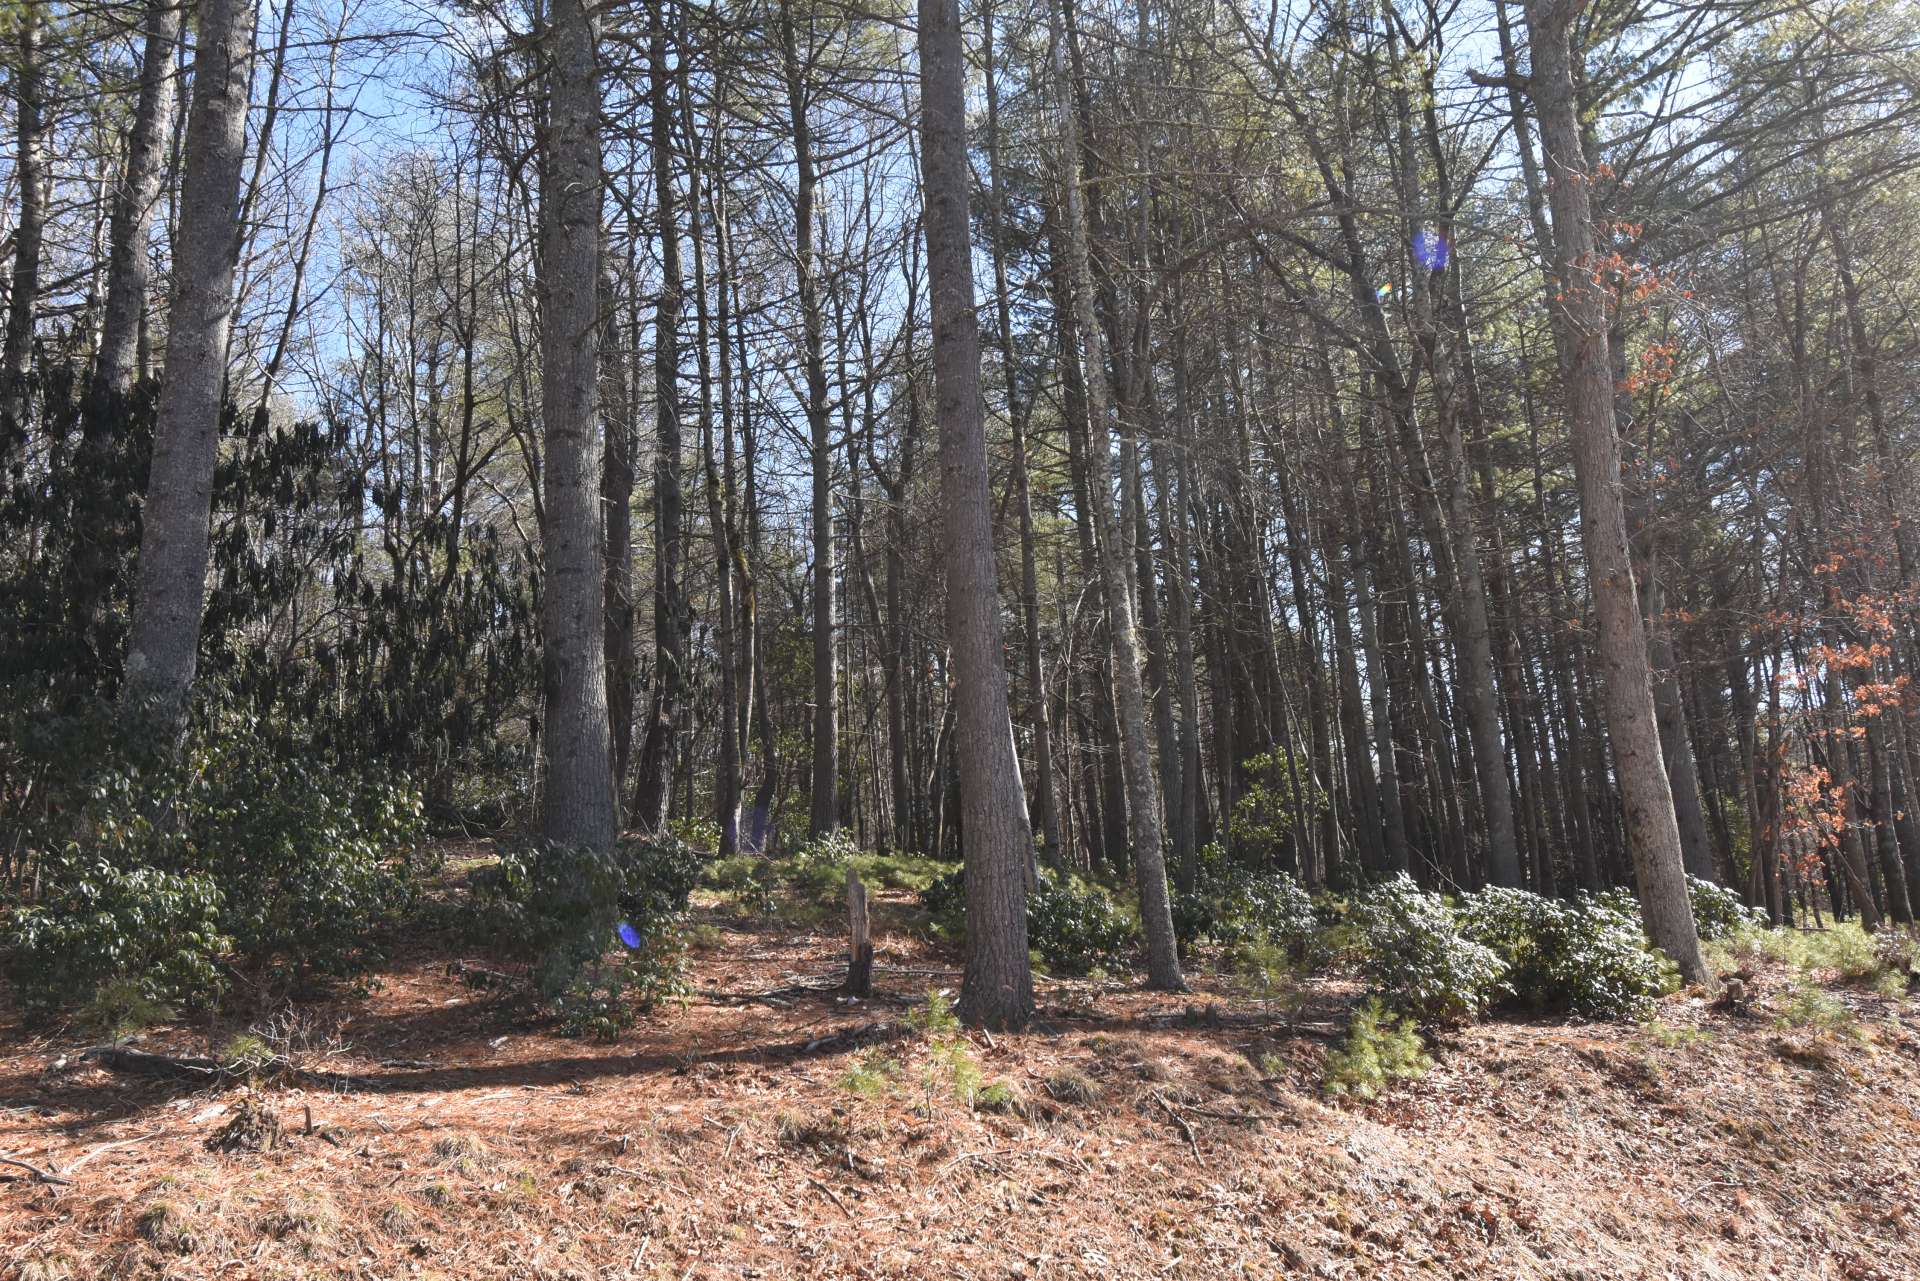 Lot 6 is offered at $28,000.  This lot can be purchased with lot 13, making a 2.5 acre homesite, for a discounted price.  Come take a look today! Ask for information on listing L234.